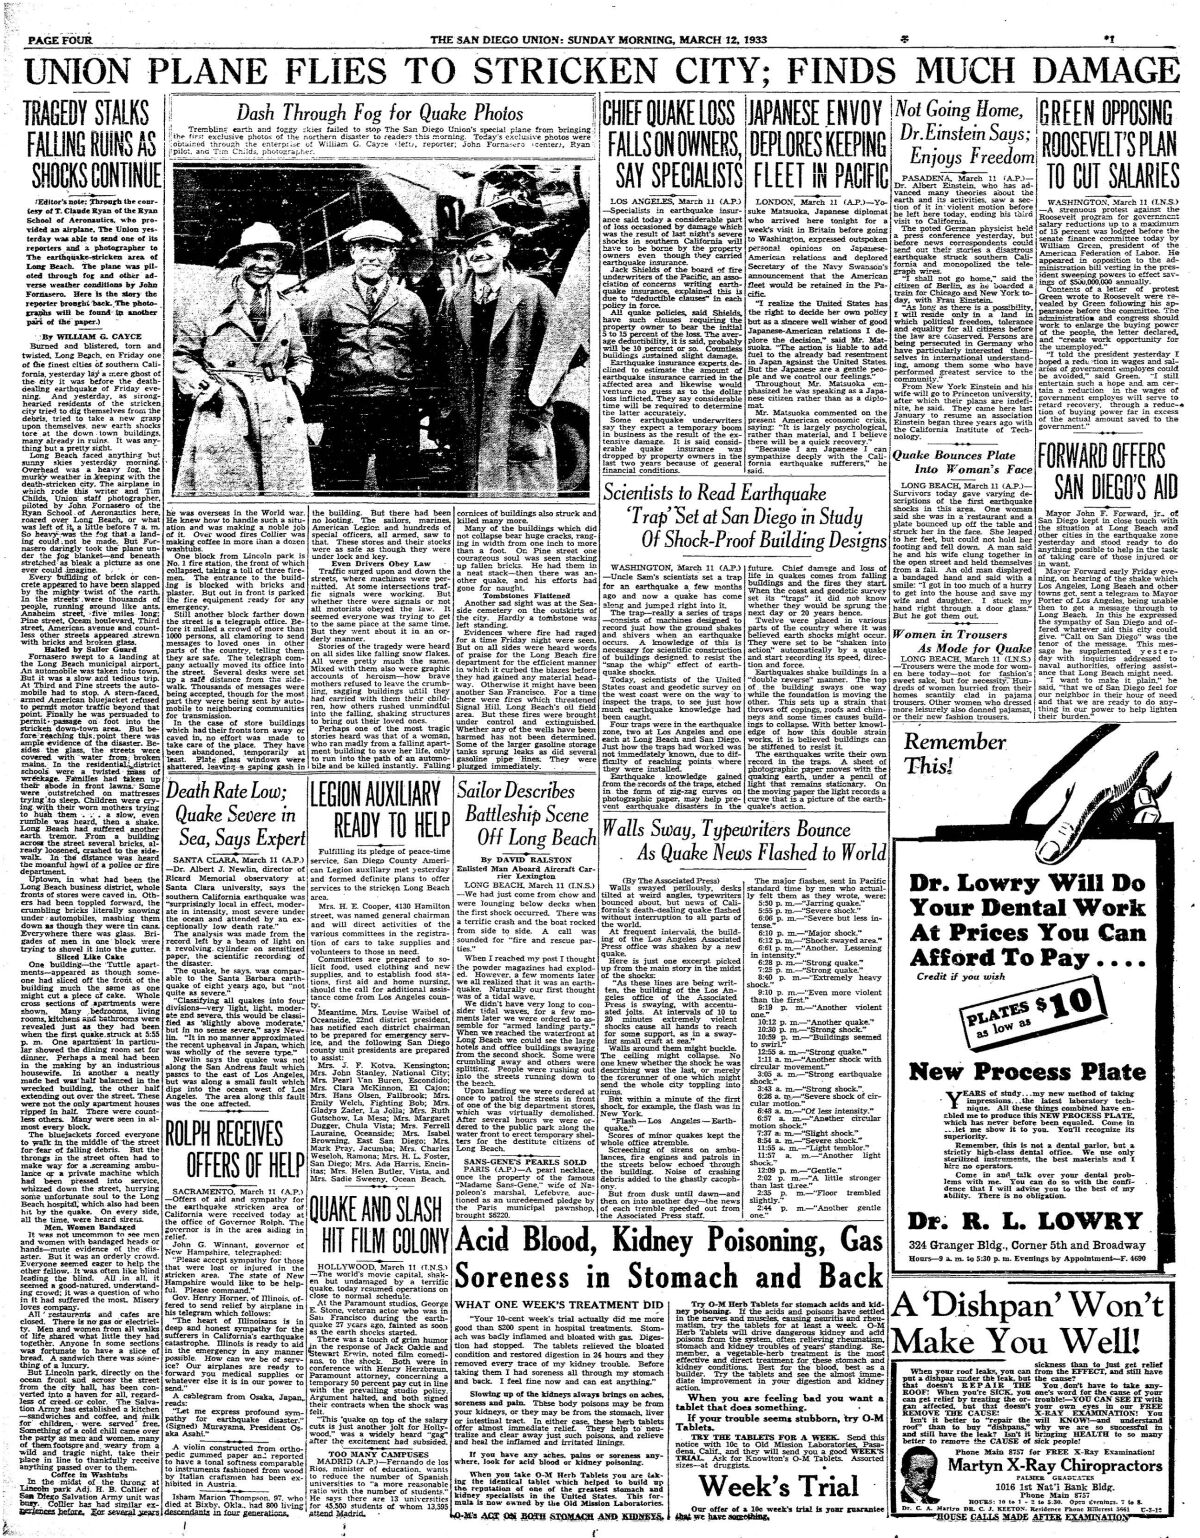 Page four of The San Diego Union, Sunday, March 12, 1933.